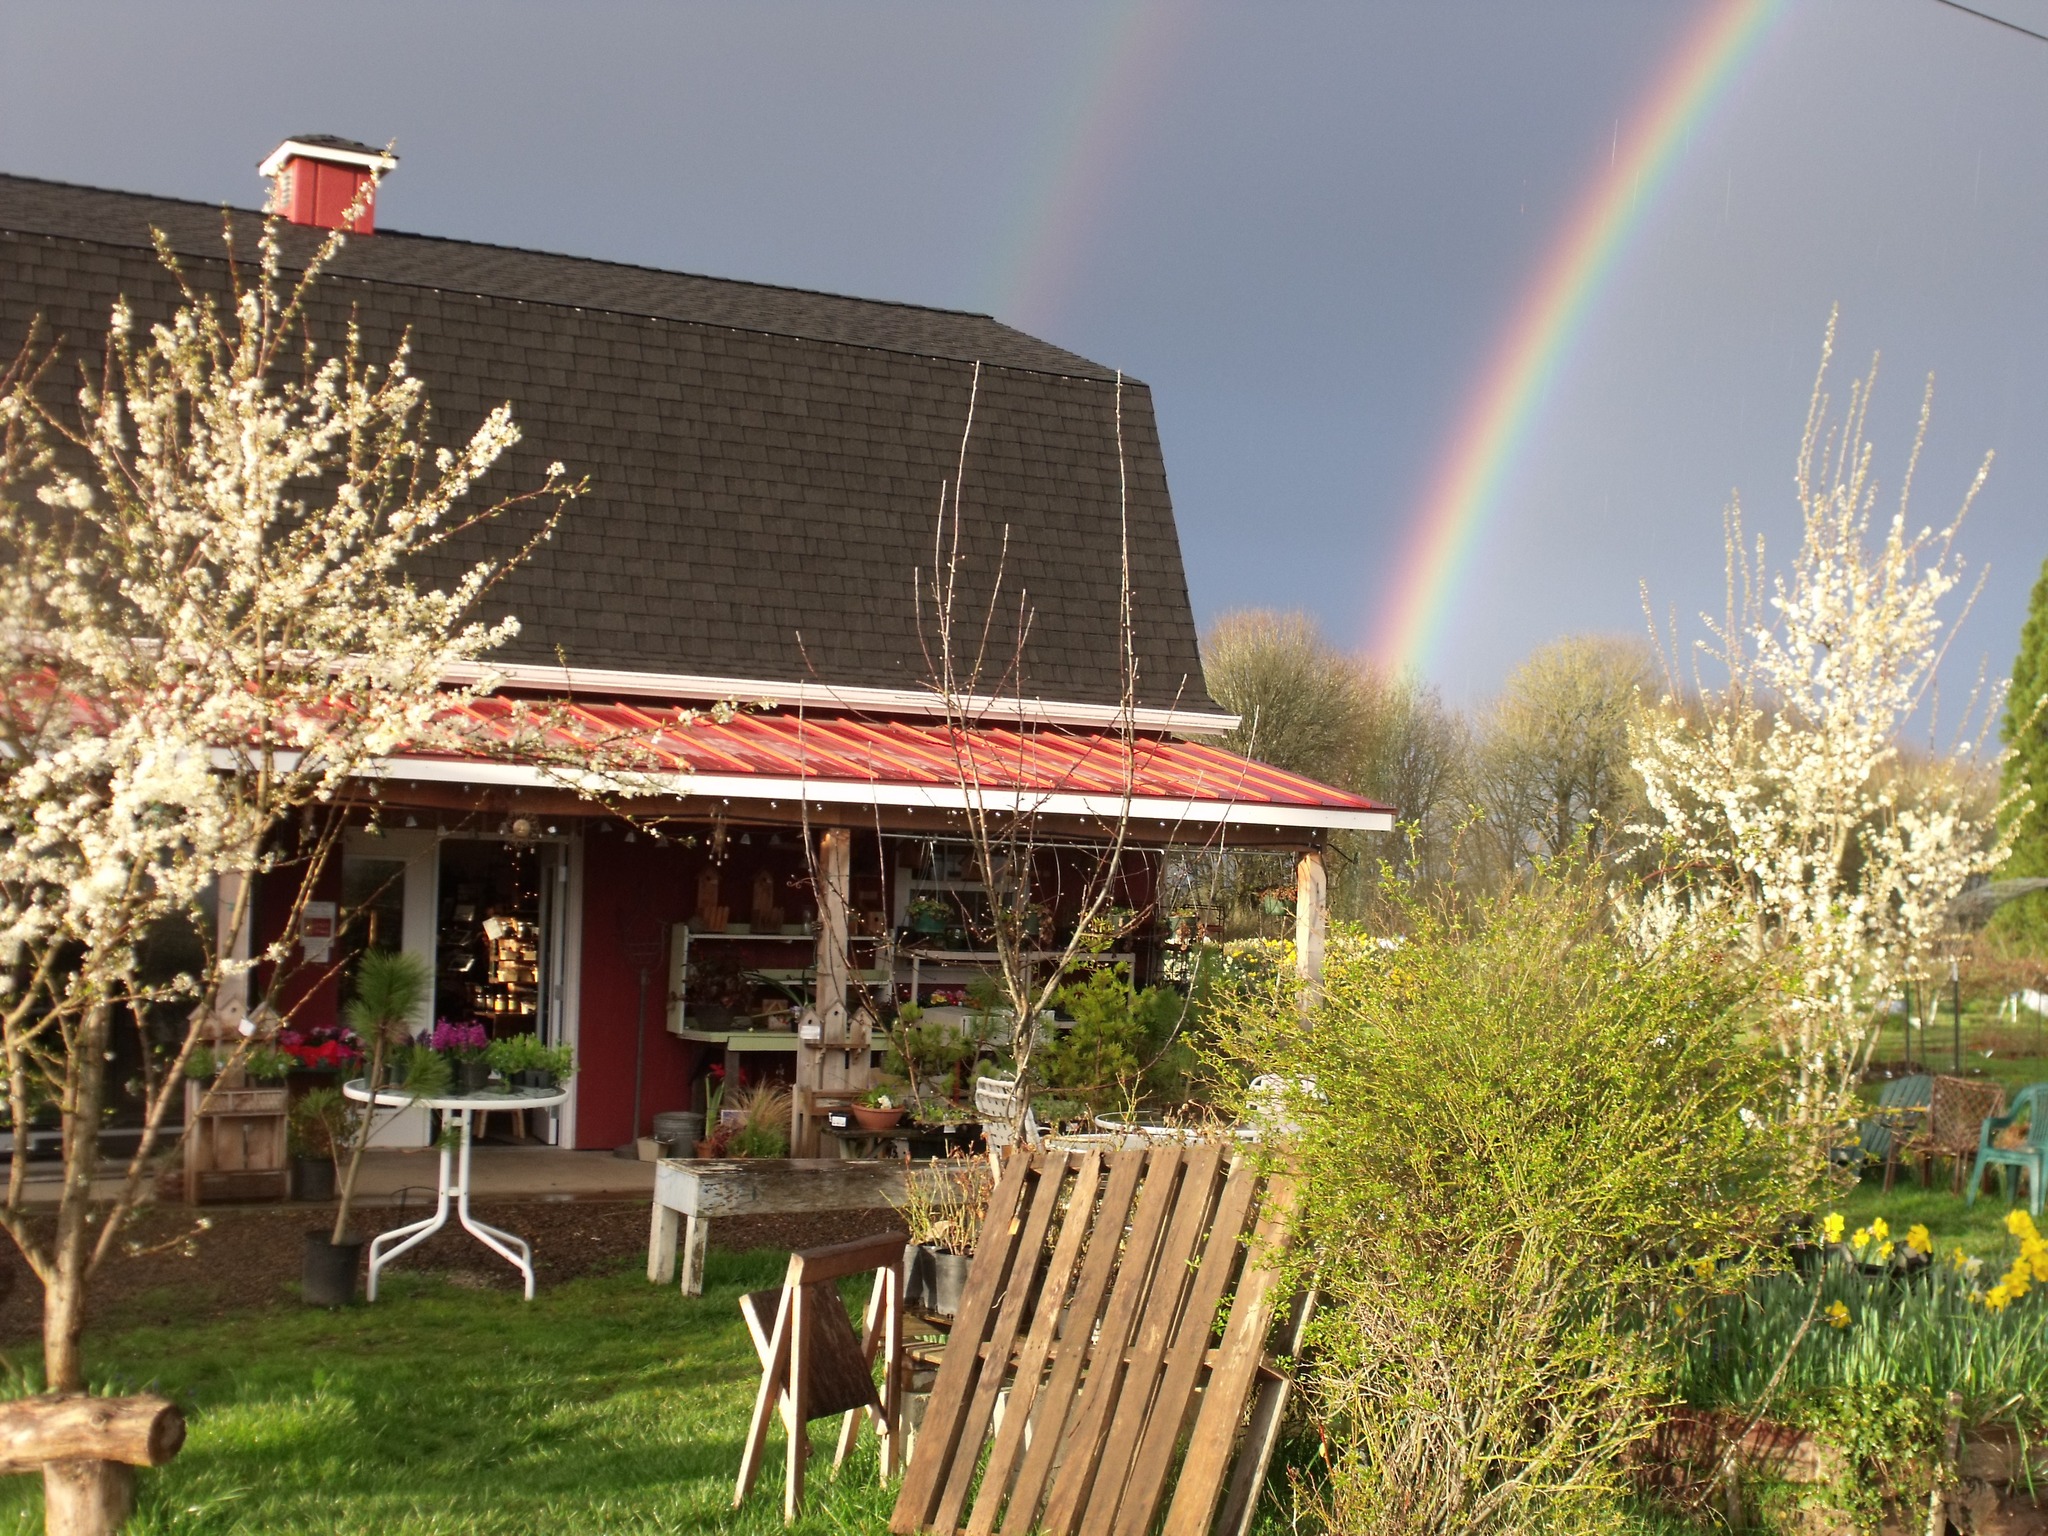 Photo of Midway Farms with rainbow.